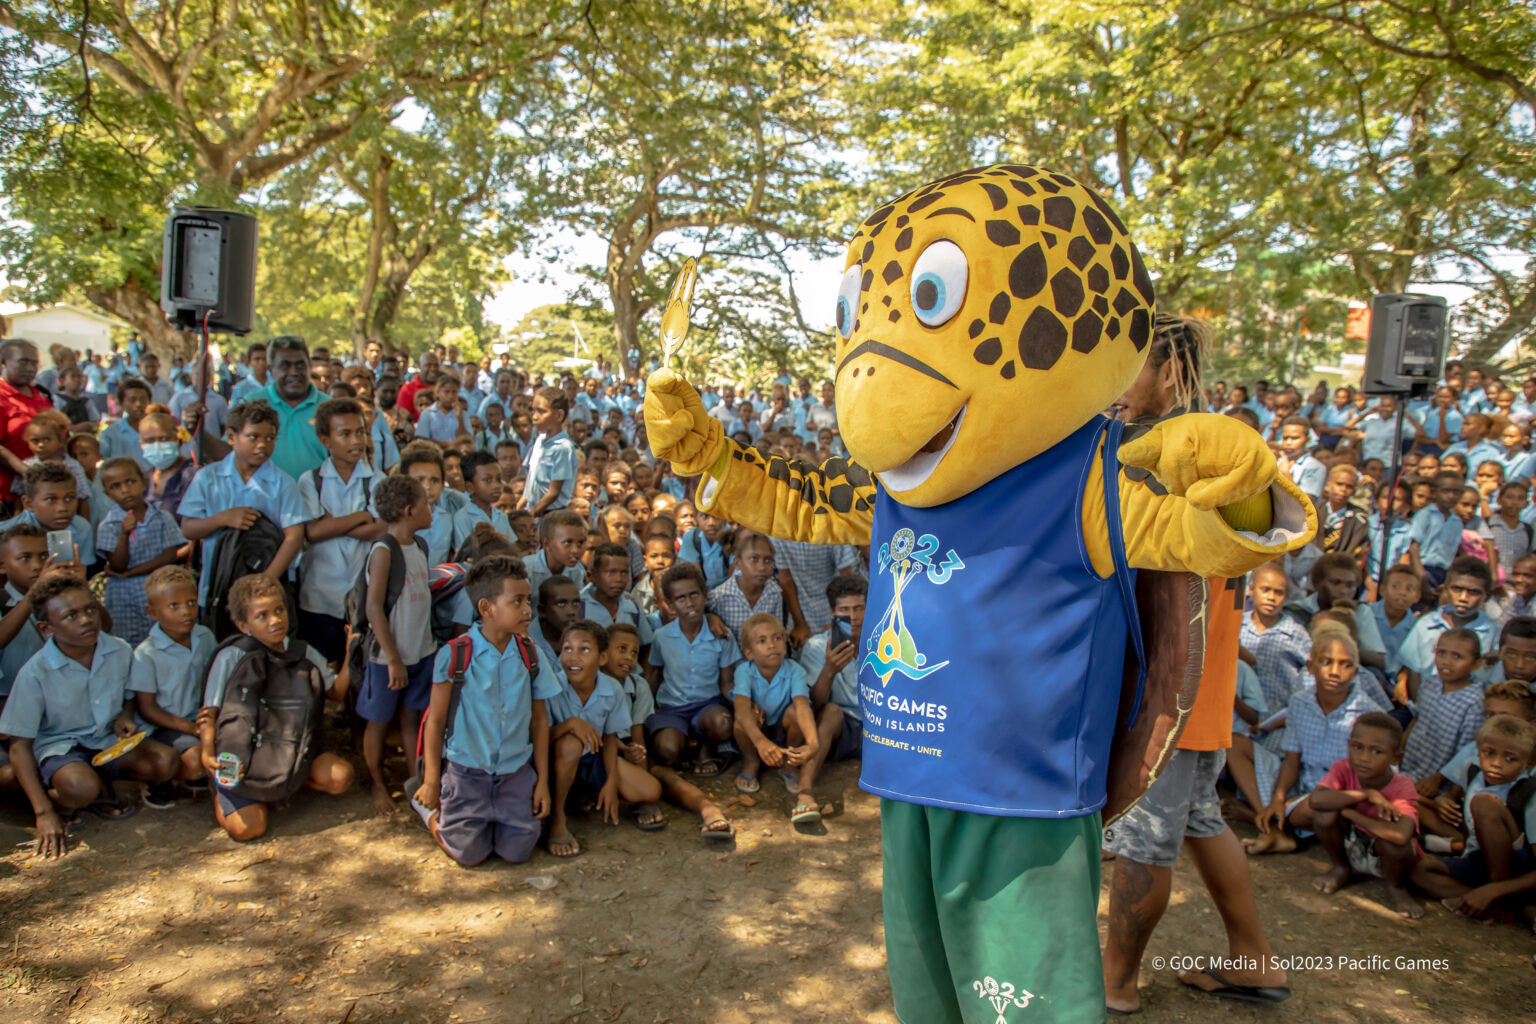 SOLO, the 2023 Pacific Games mascot, has been involved in promotional school visits ©GOC